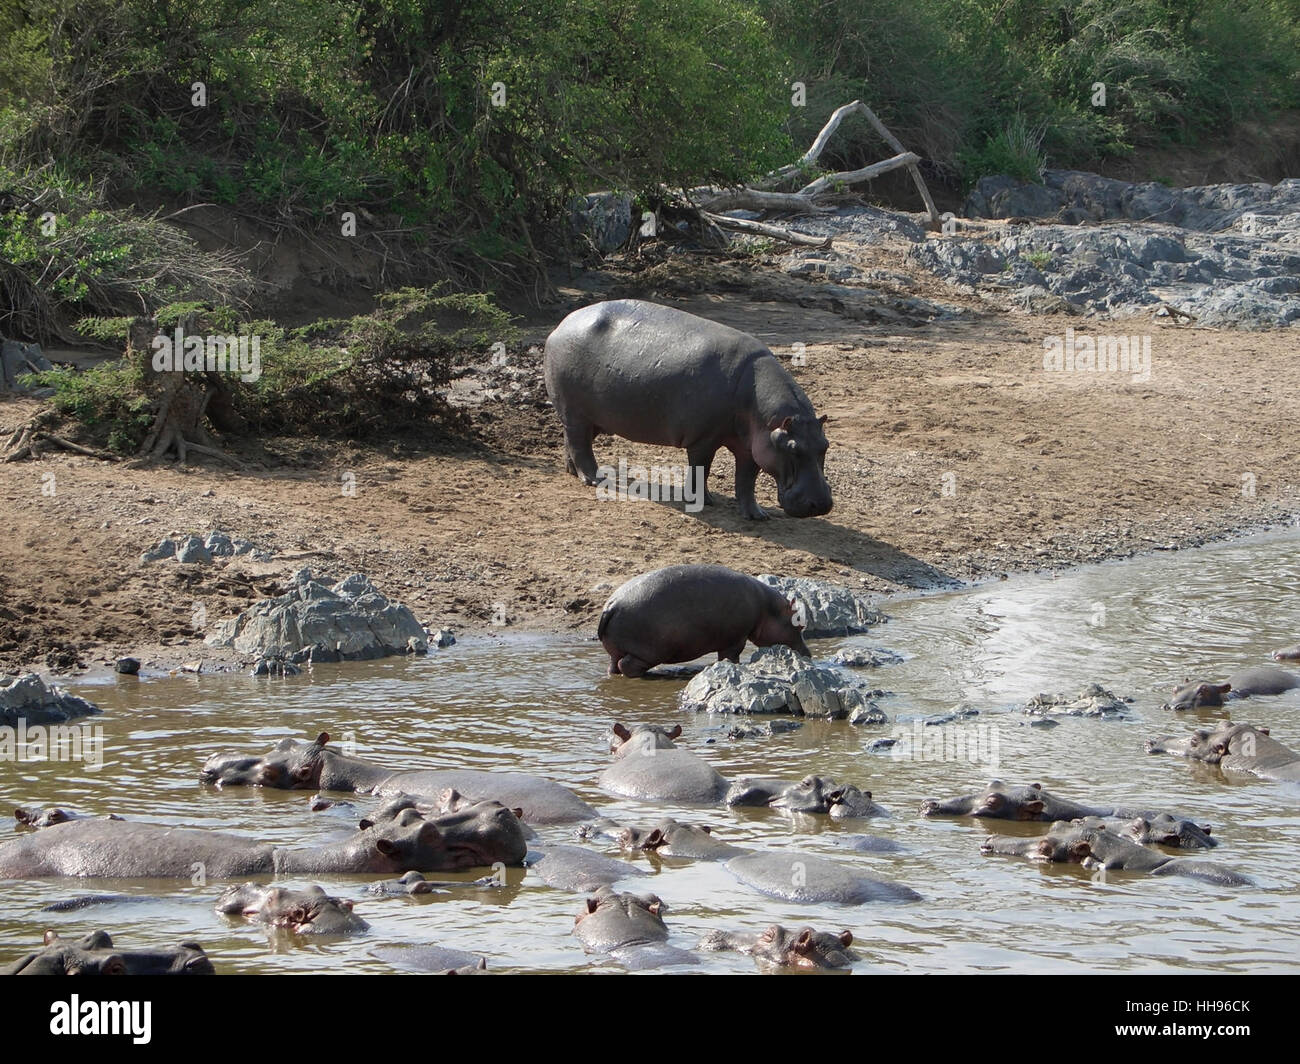 some Hippos at a sandy bank in Tanzania (Africa) Stock Photo